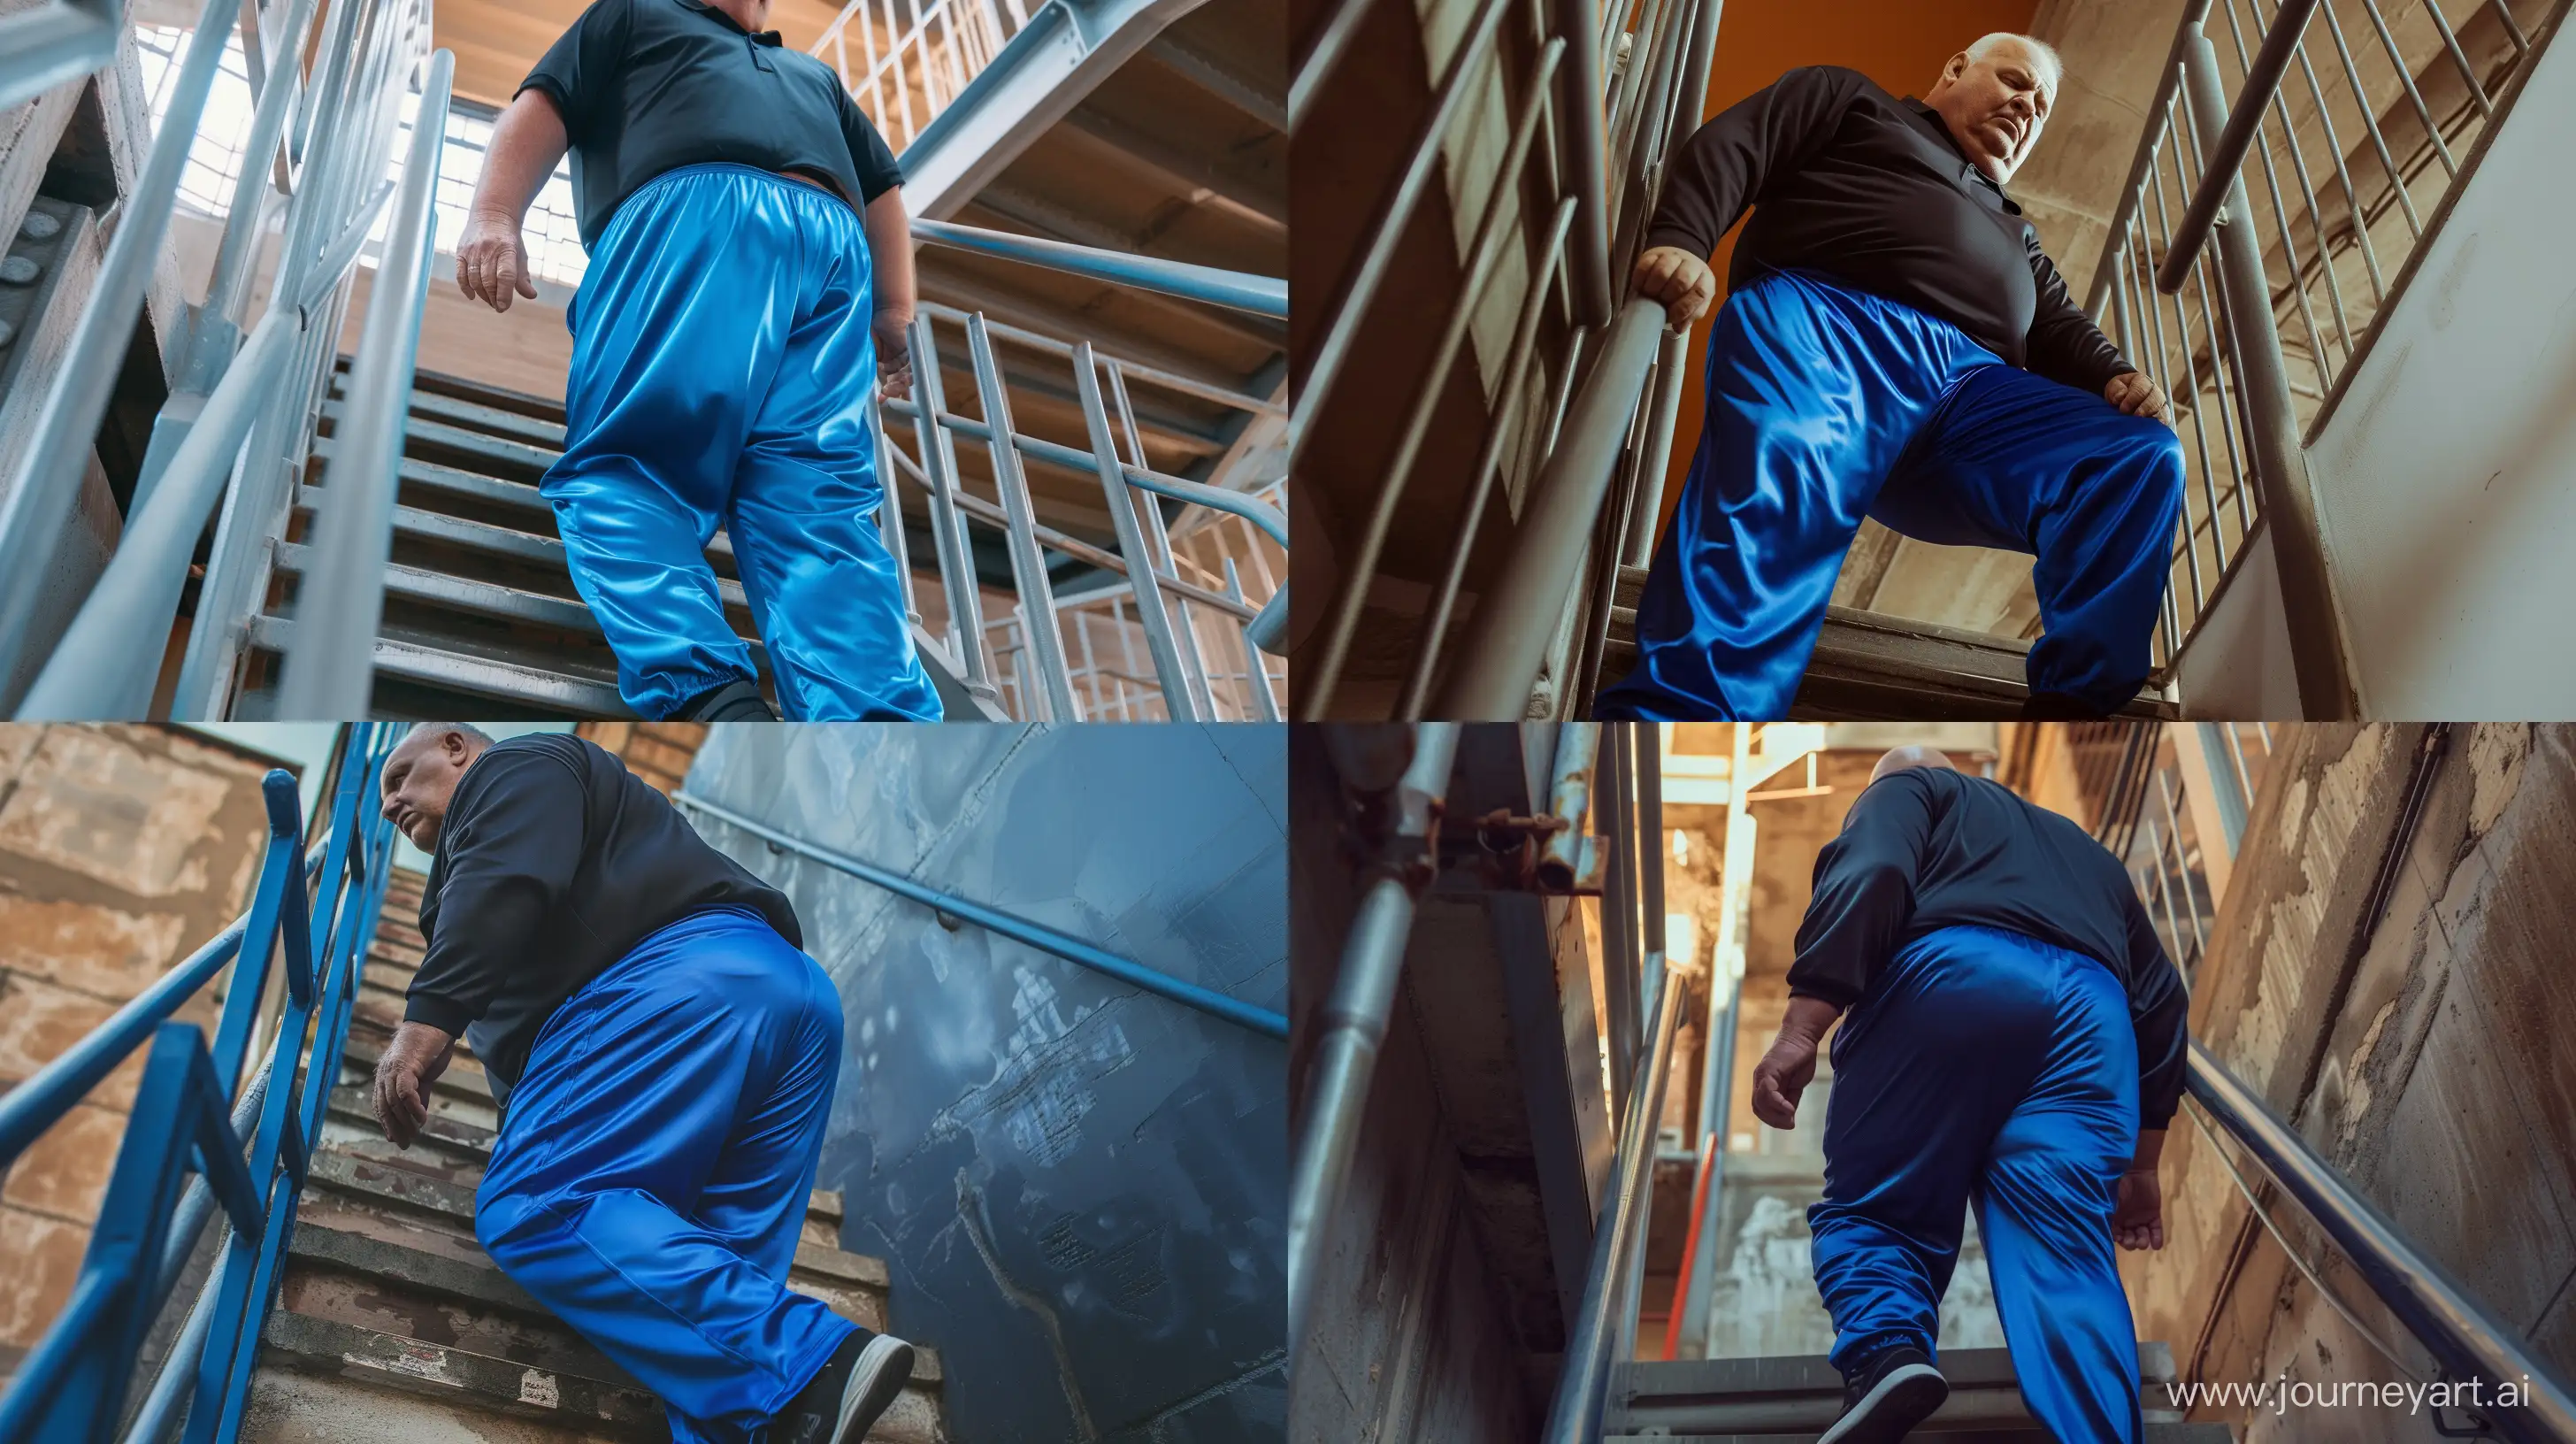 Elderly-Man-Climbing-Stairs-in-Silk-Royal-Blue-Tracksuit-and-Black-Polo-Shirt